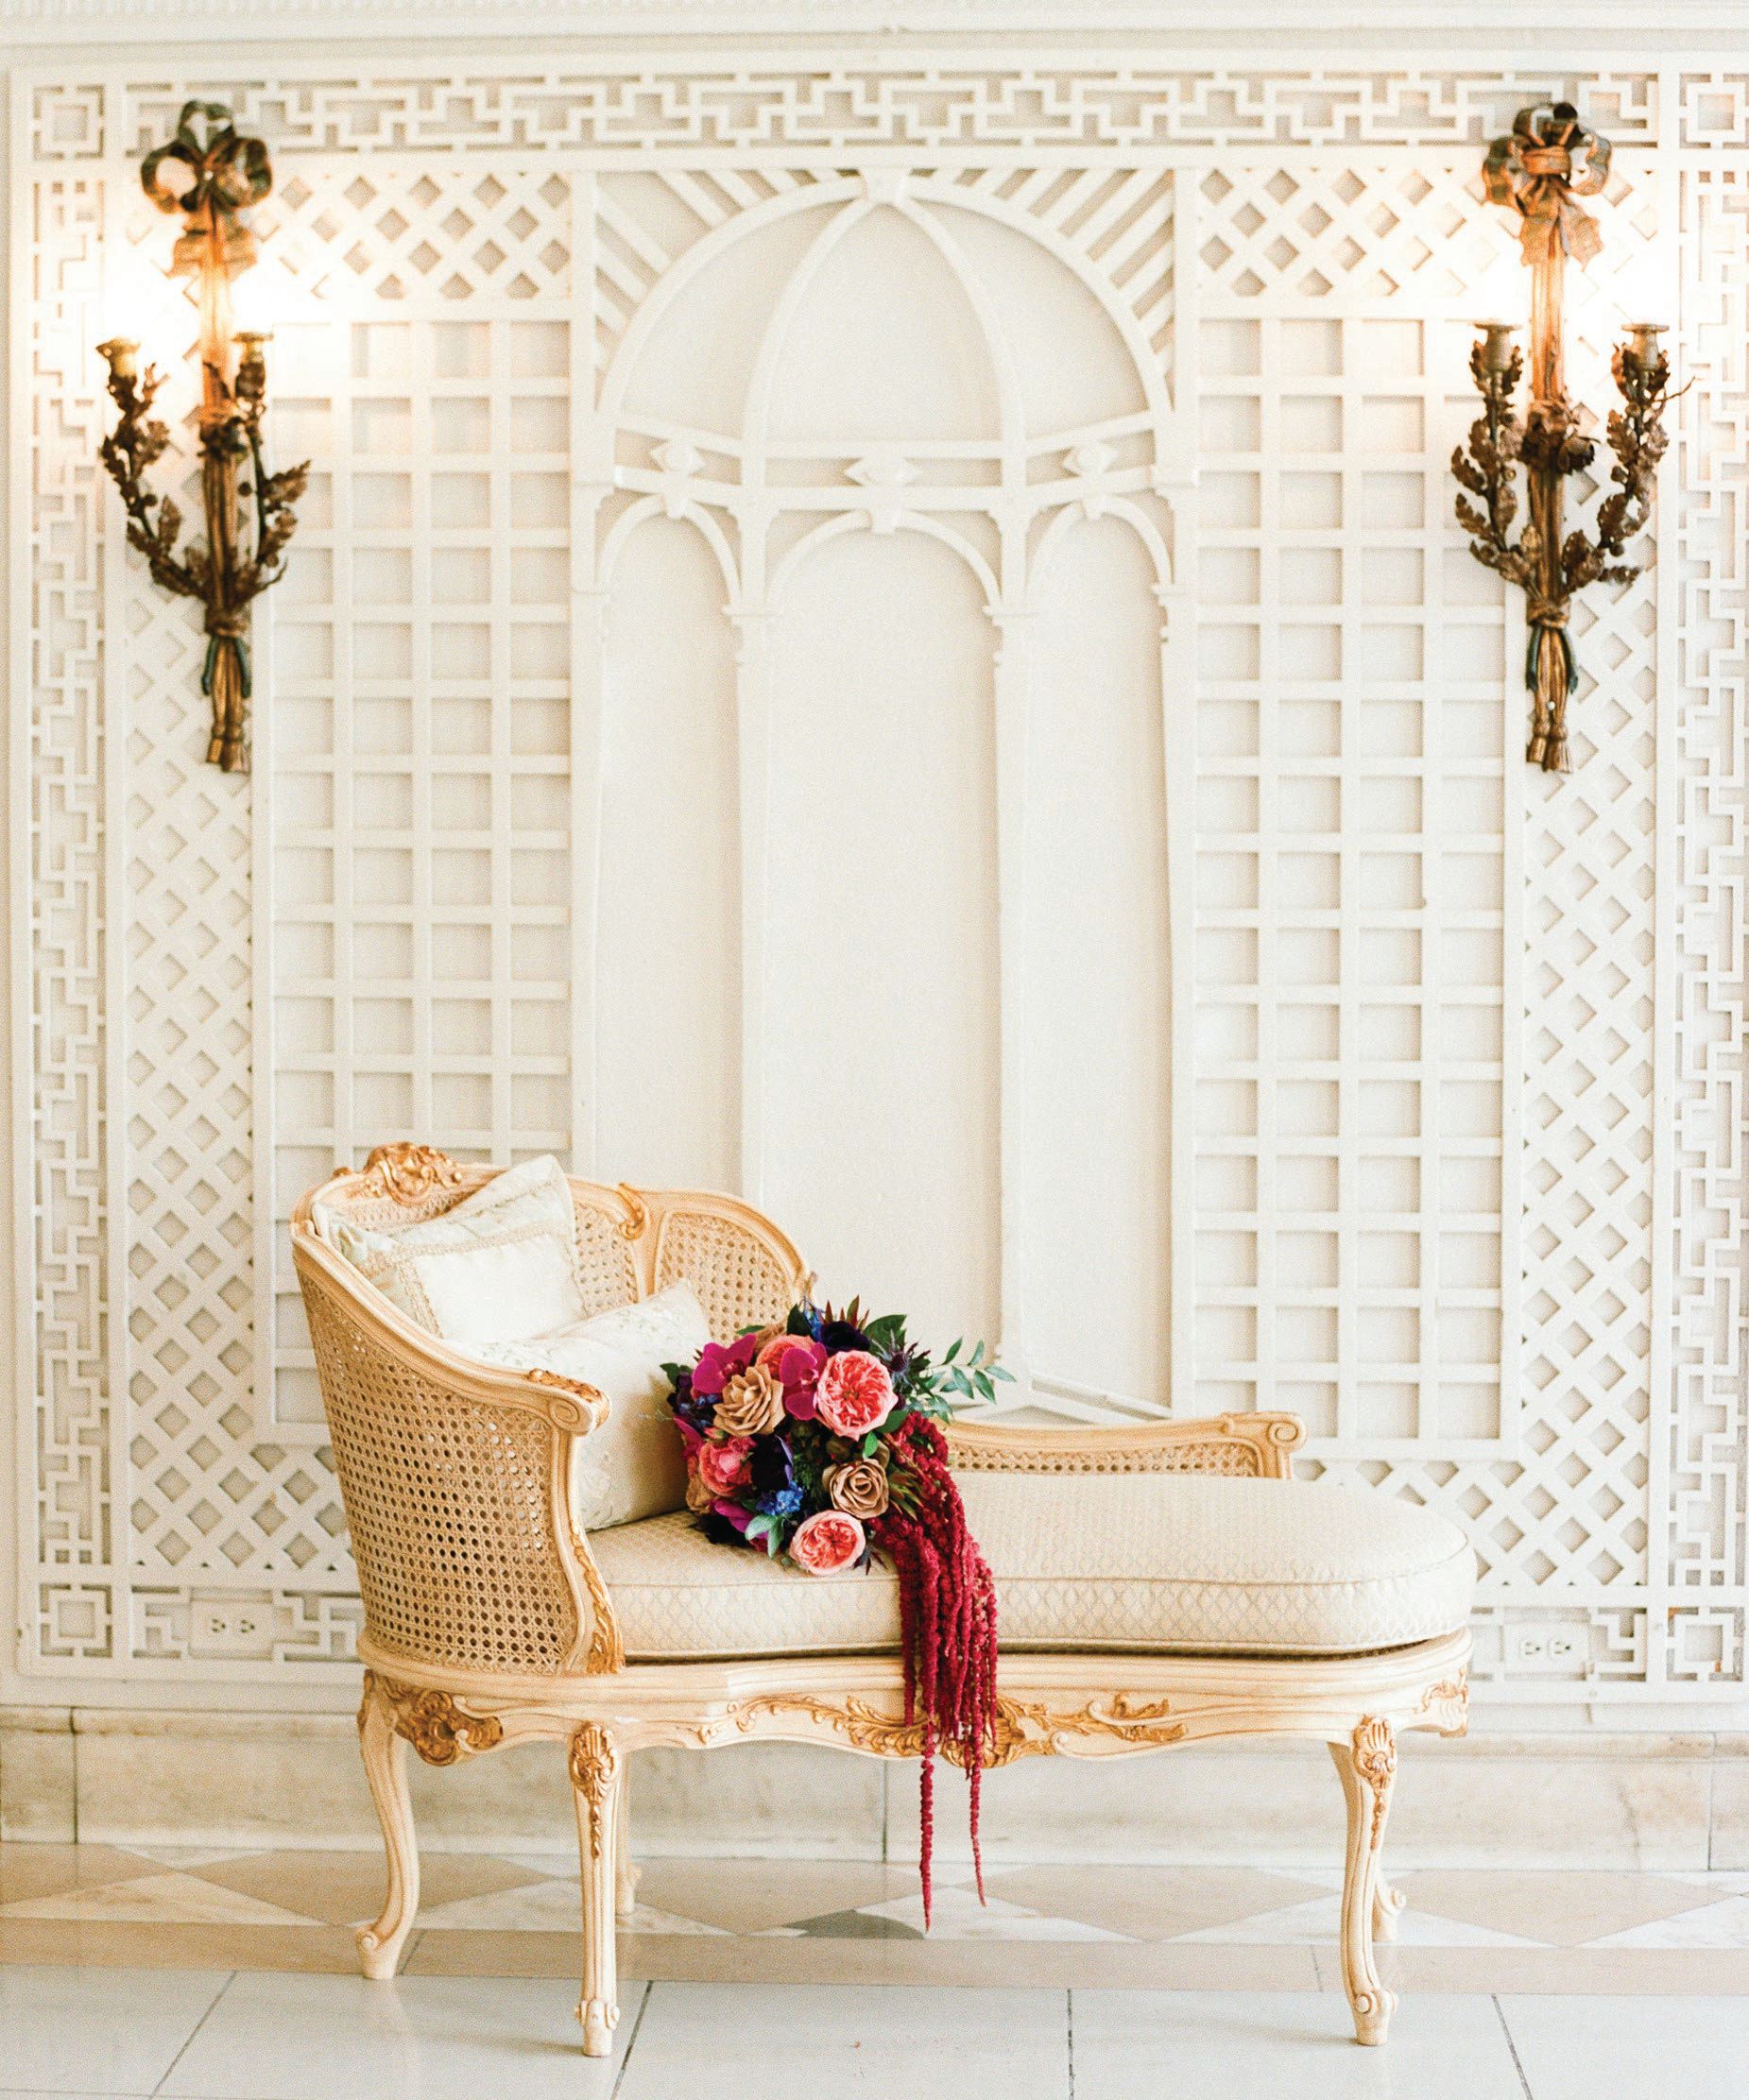 The Gilded Aisle team provided an antique chaise lounge to play up the French influence. Photographed by Lisa Blume Photography & Lynette Boyle Photography